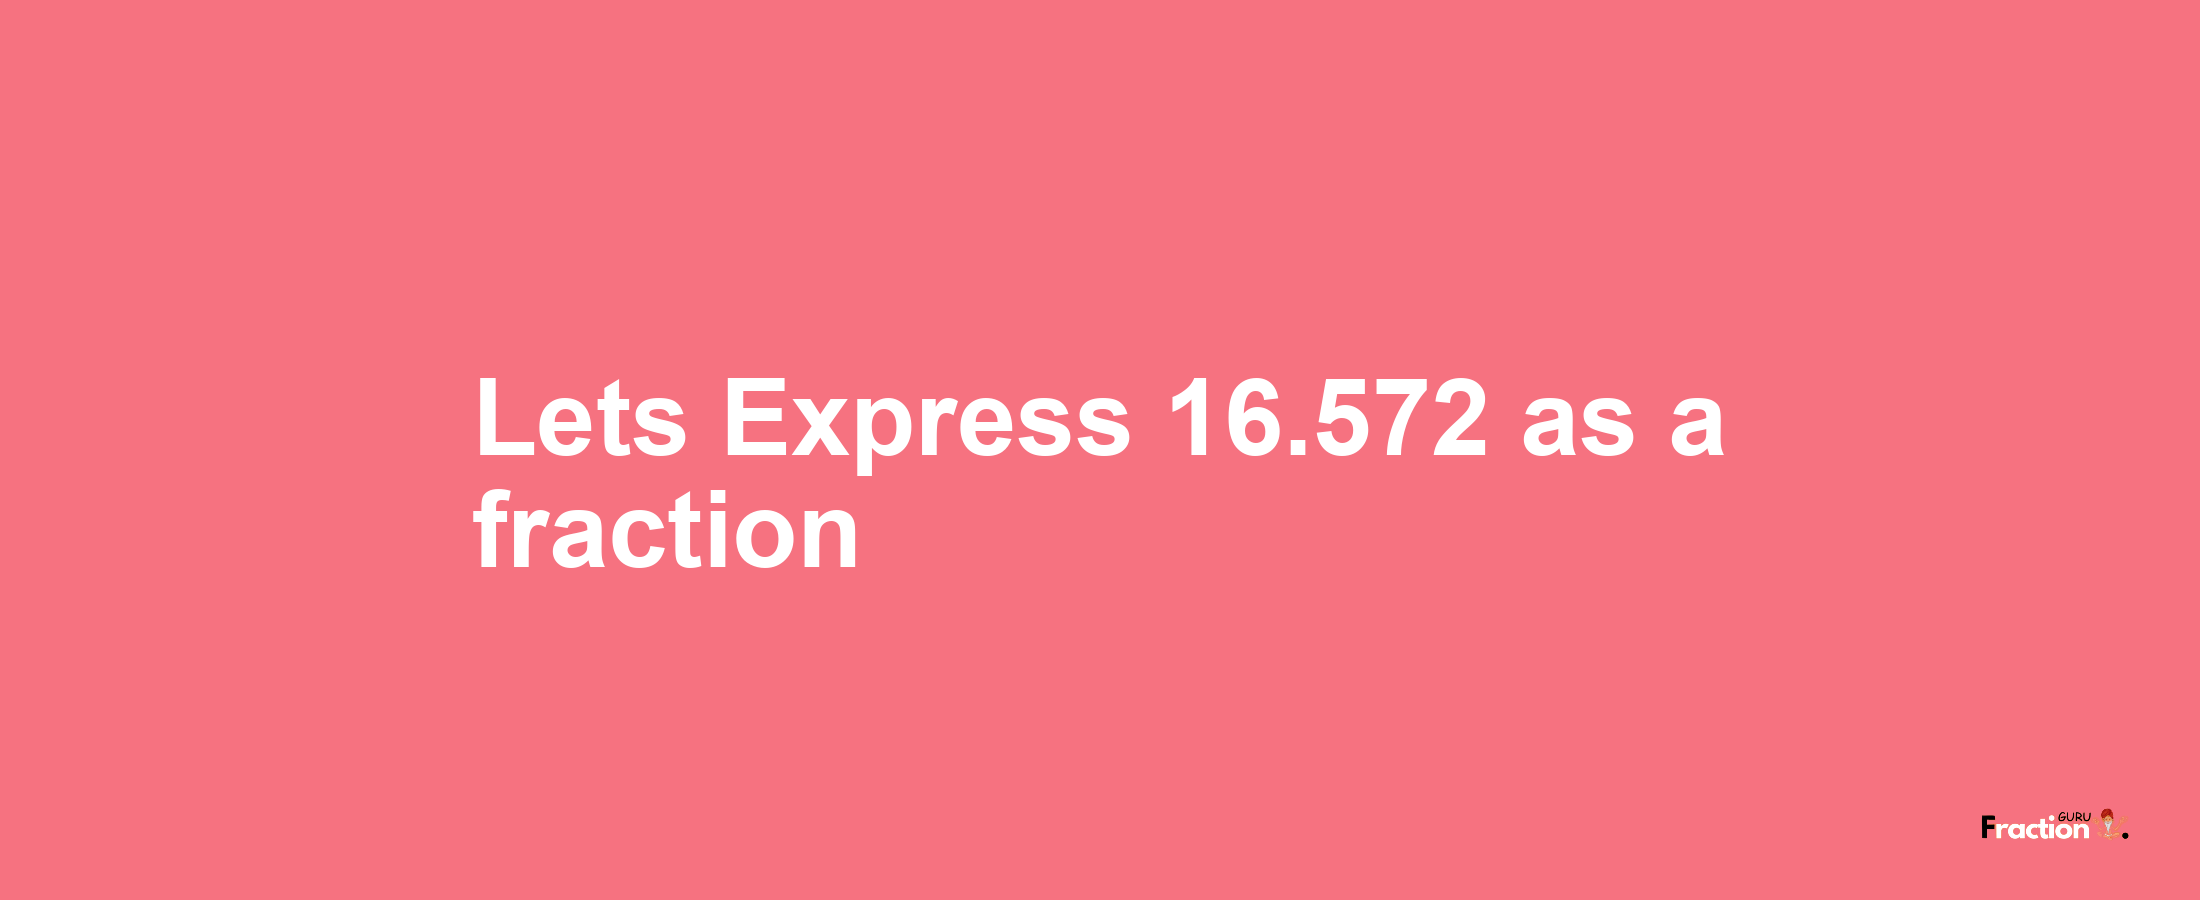 Lets Express 16.572 as afraction